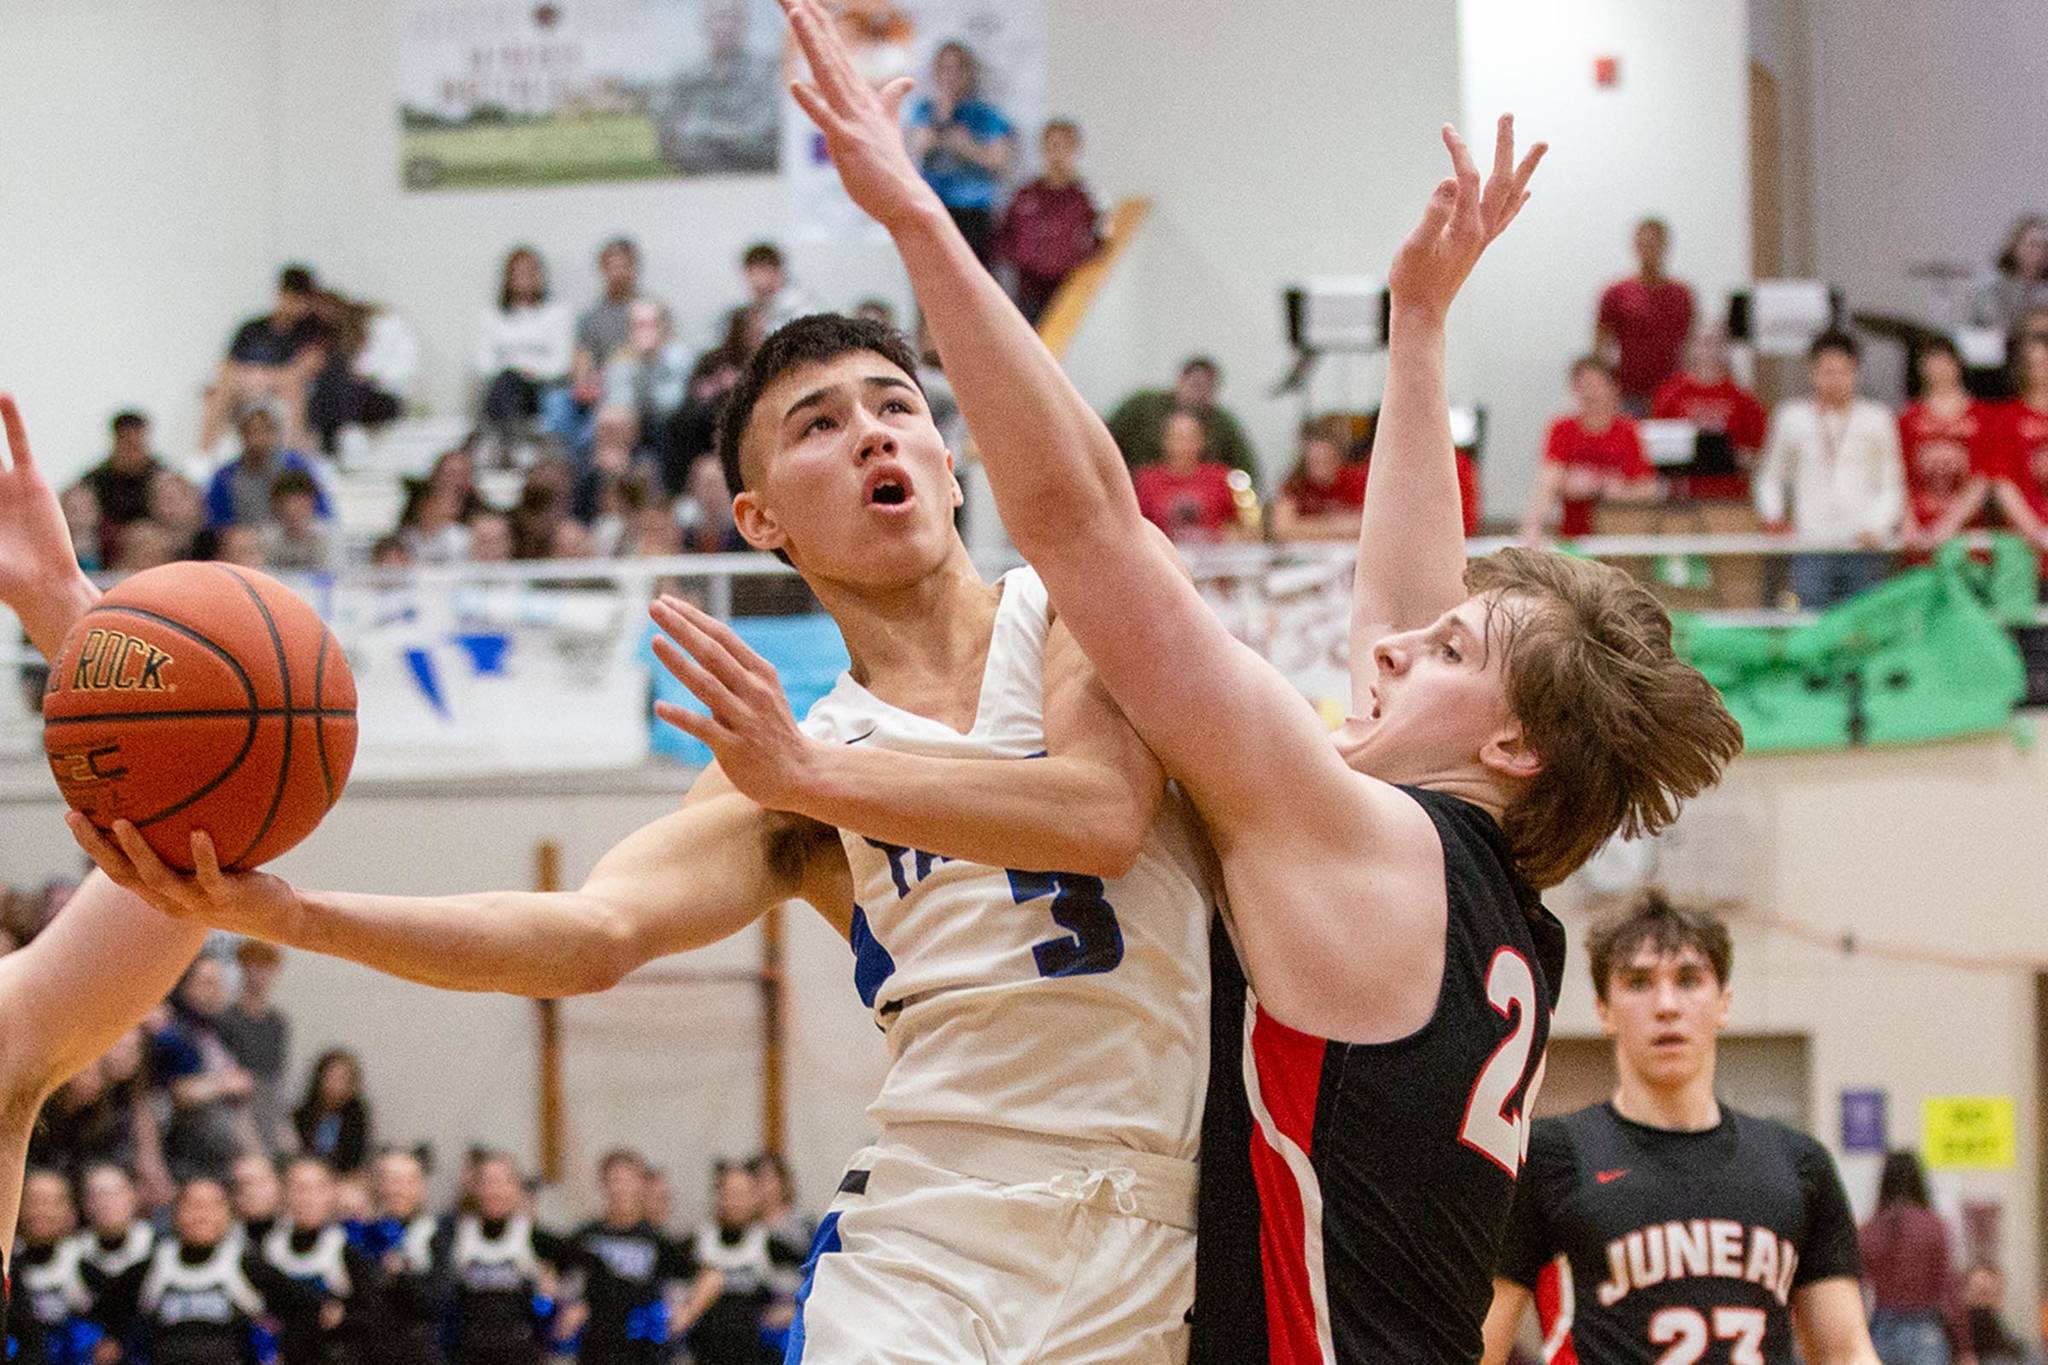 Courtesy Photos | Heather Holt                                TMHS’ Bryson Echiverri drives toward the hoop and is closely defended by JDHS’ Tad Watson in the Region V 4A championship game Friday at JDHS.